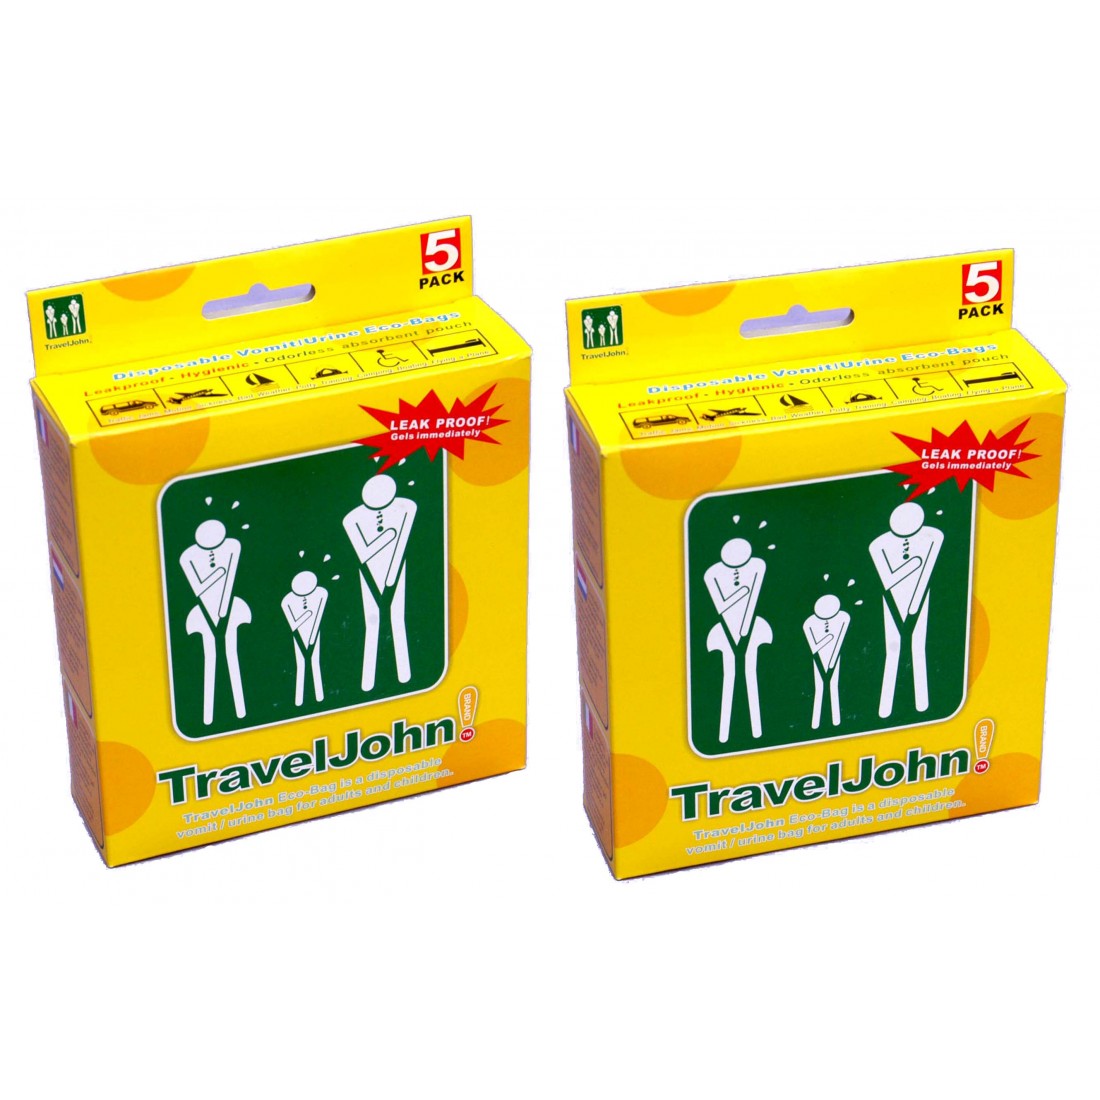 Yellow packaging on a white background. 2 boxes of TravelJohn sick bags